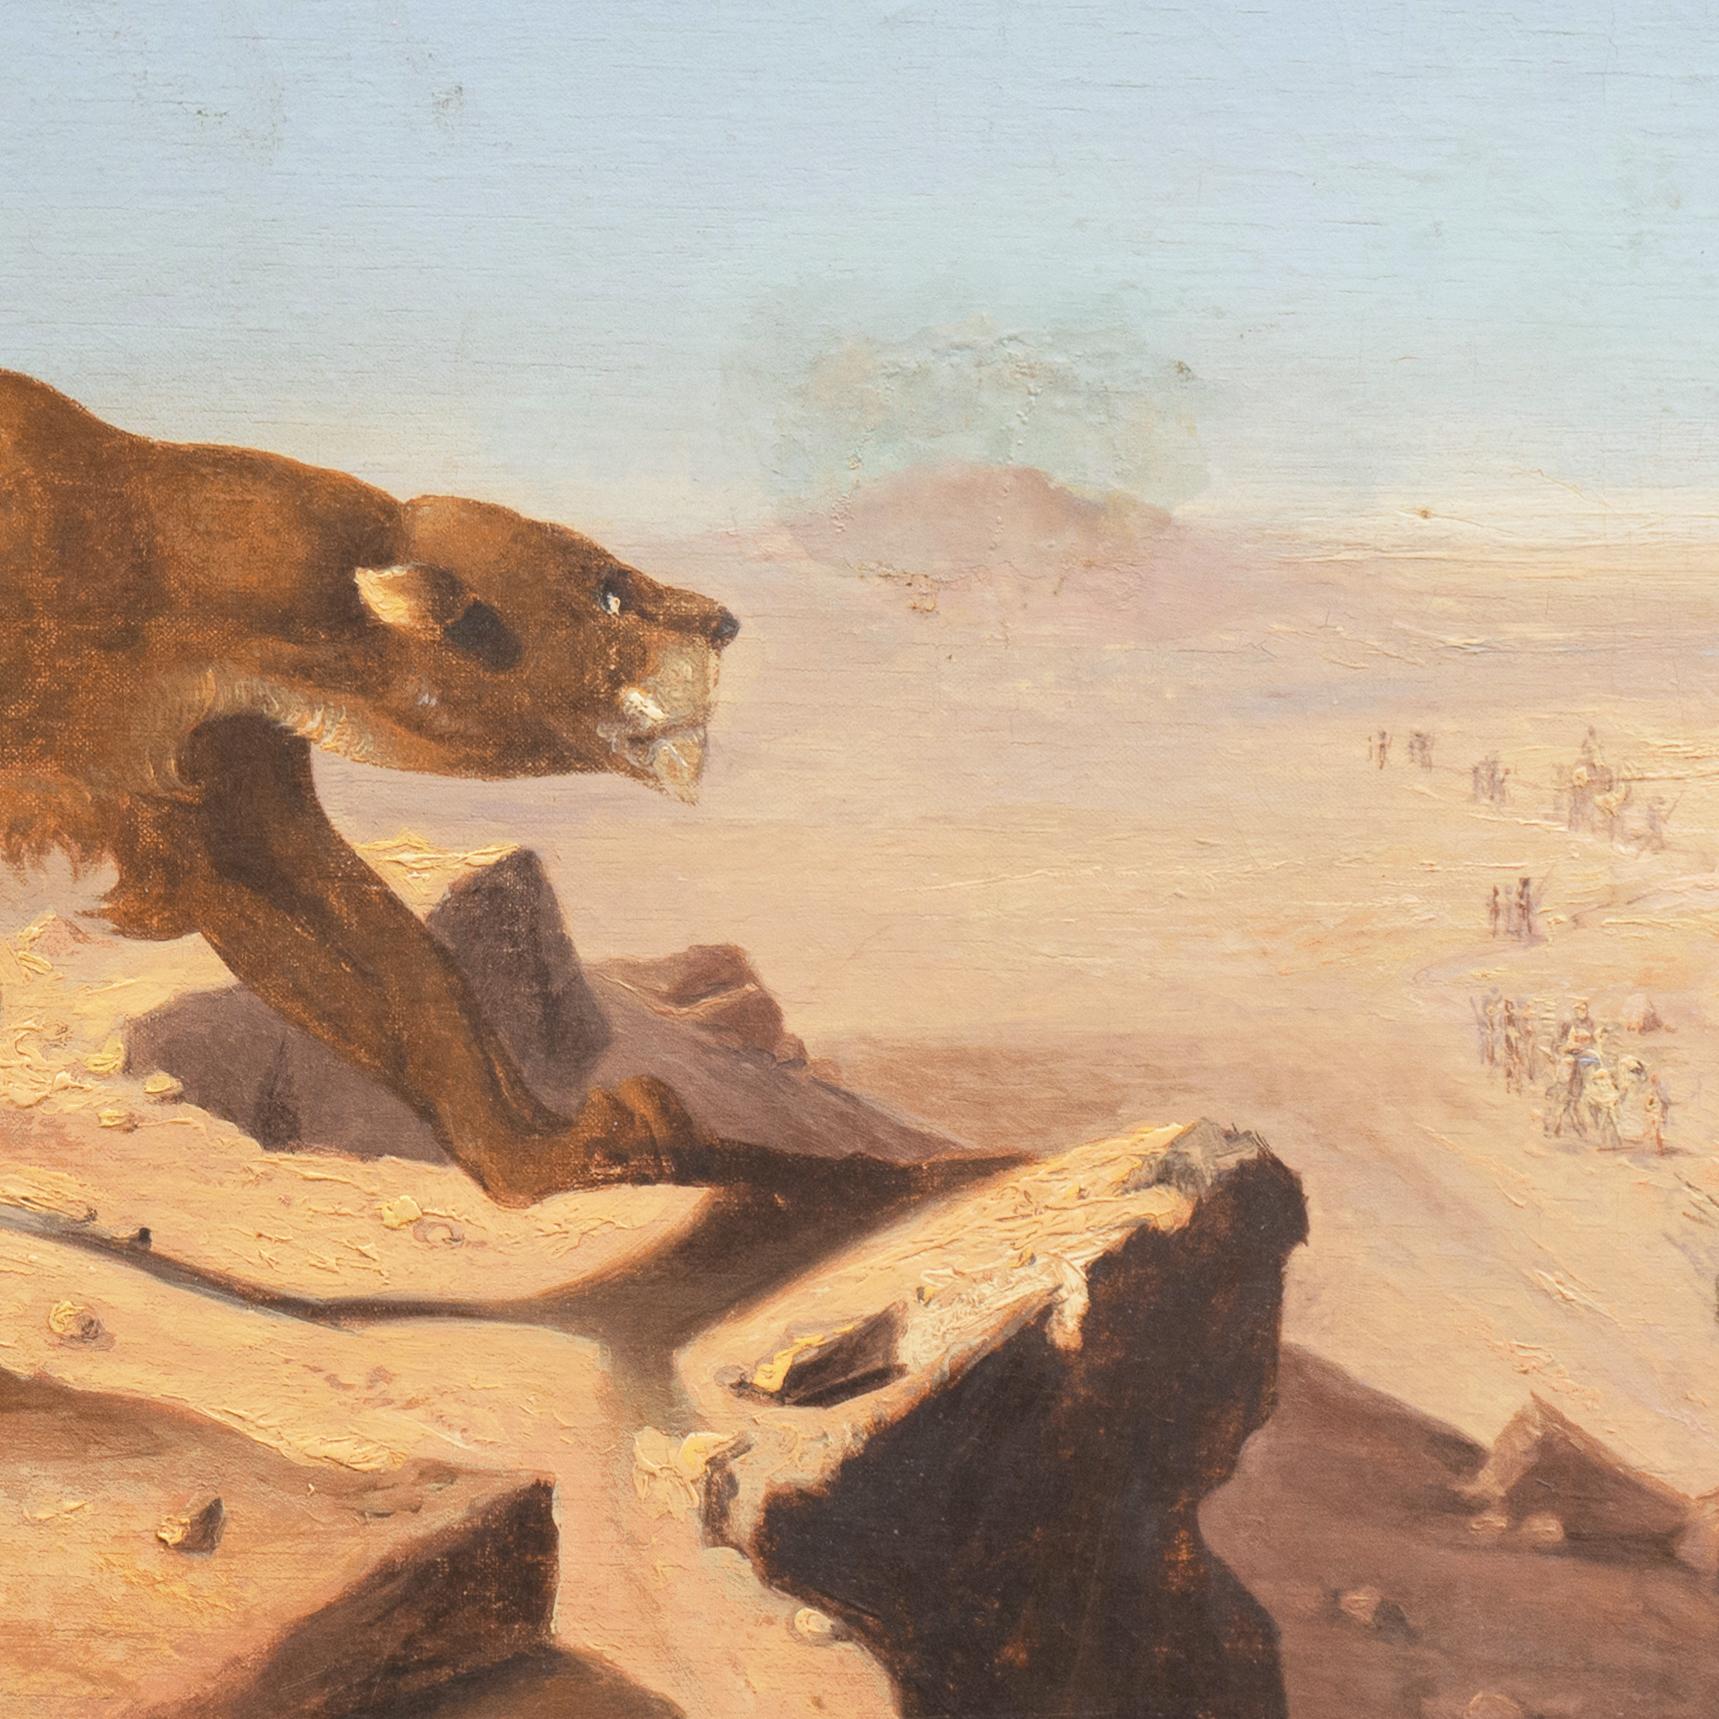  'Lions Observing a Caravan', 19th Century North African Orientalist Gericault  - Romantic Painting by Jean Louis Andre Theodore Gericault